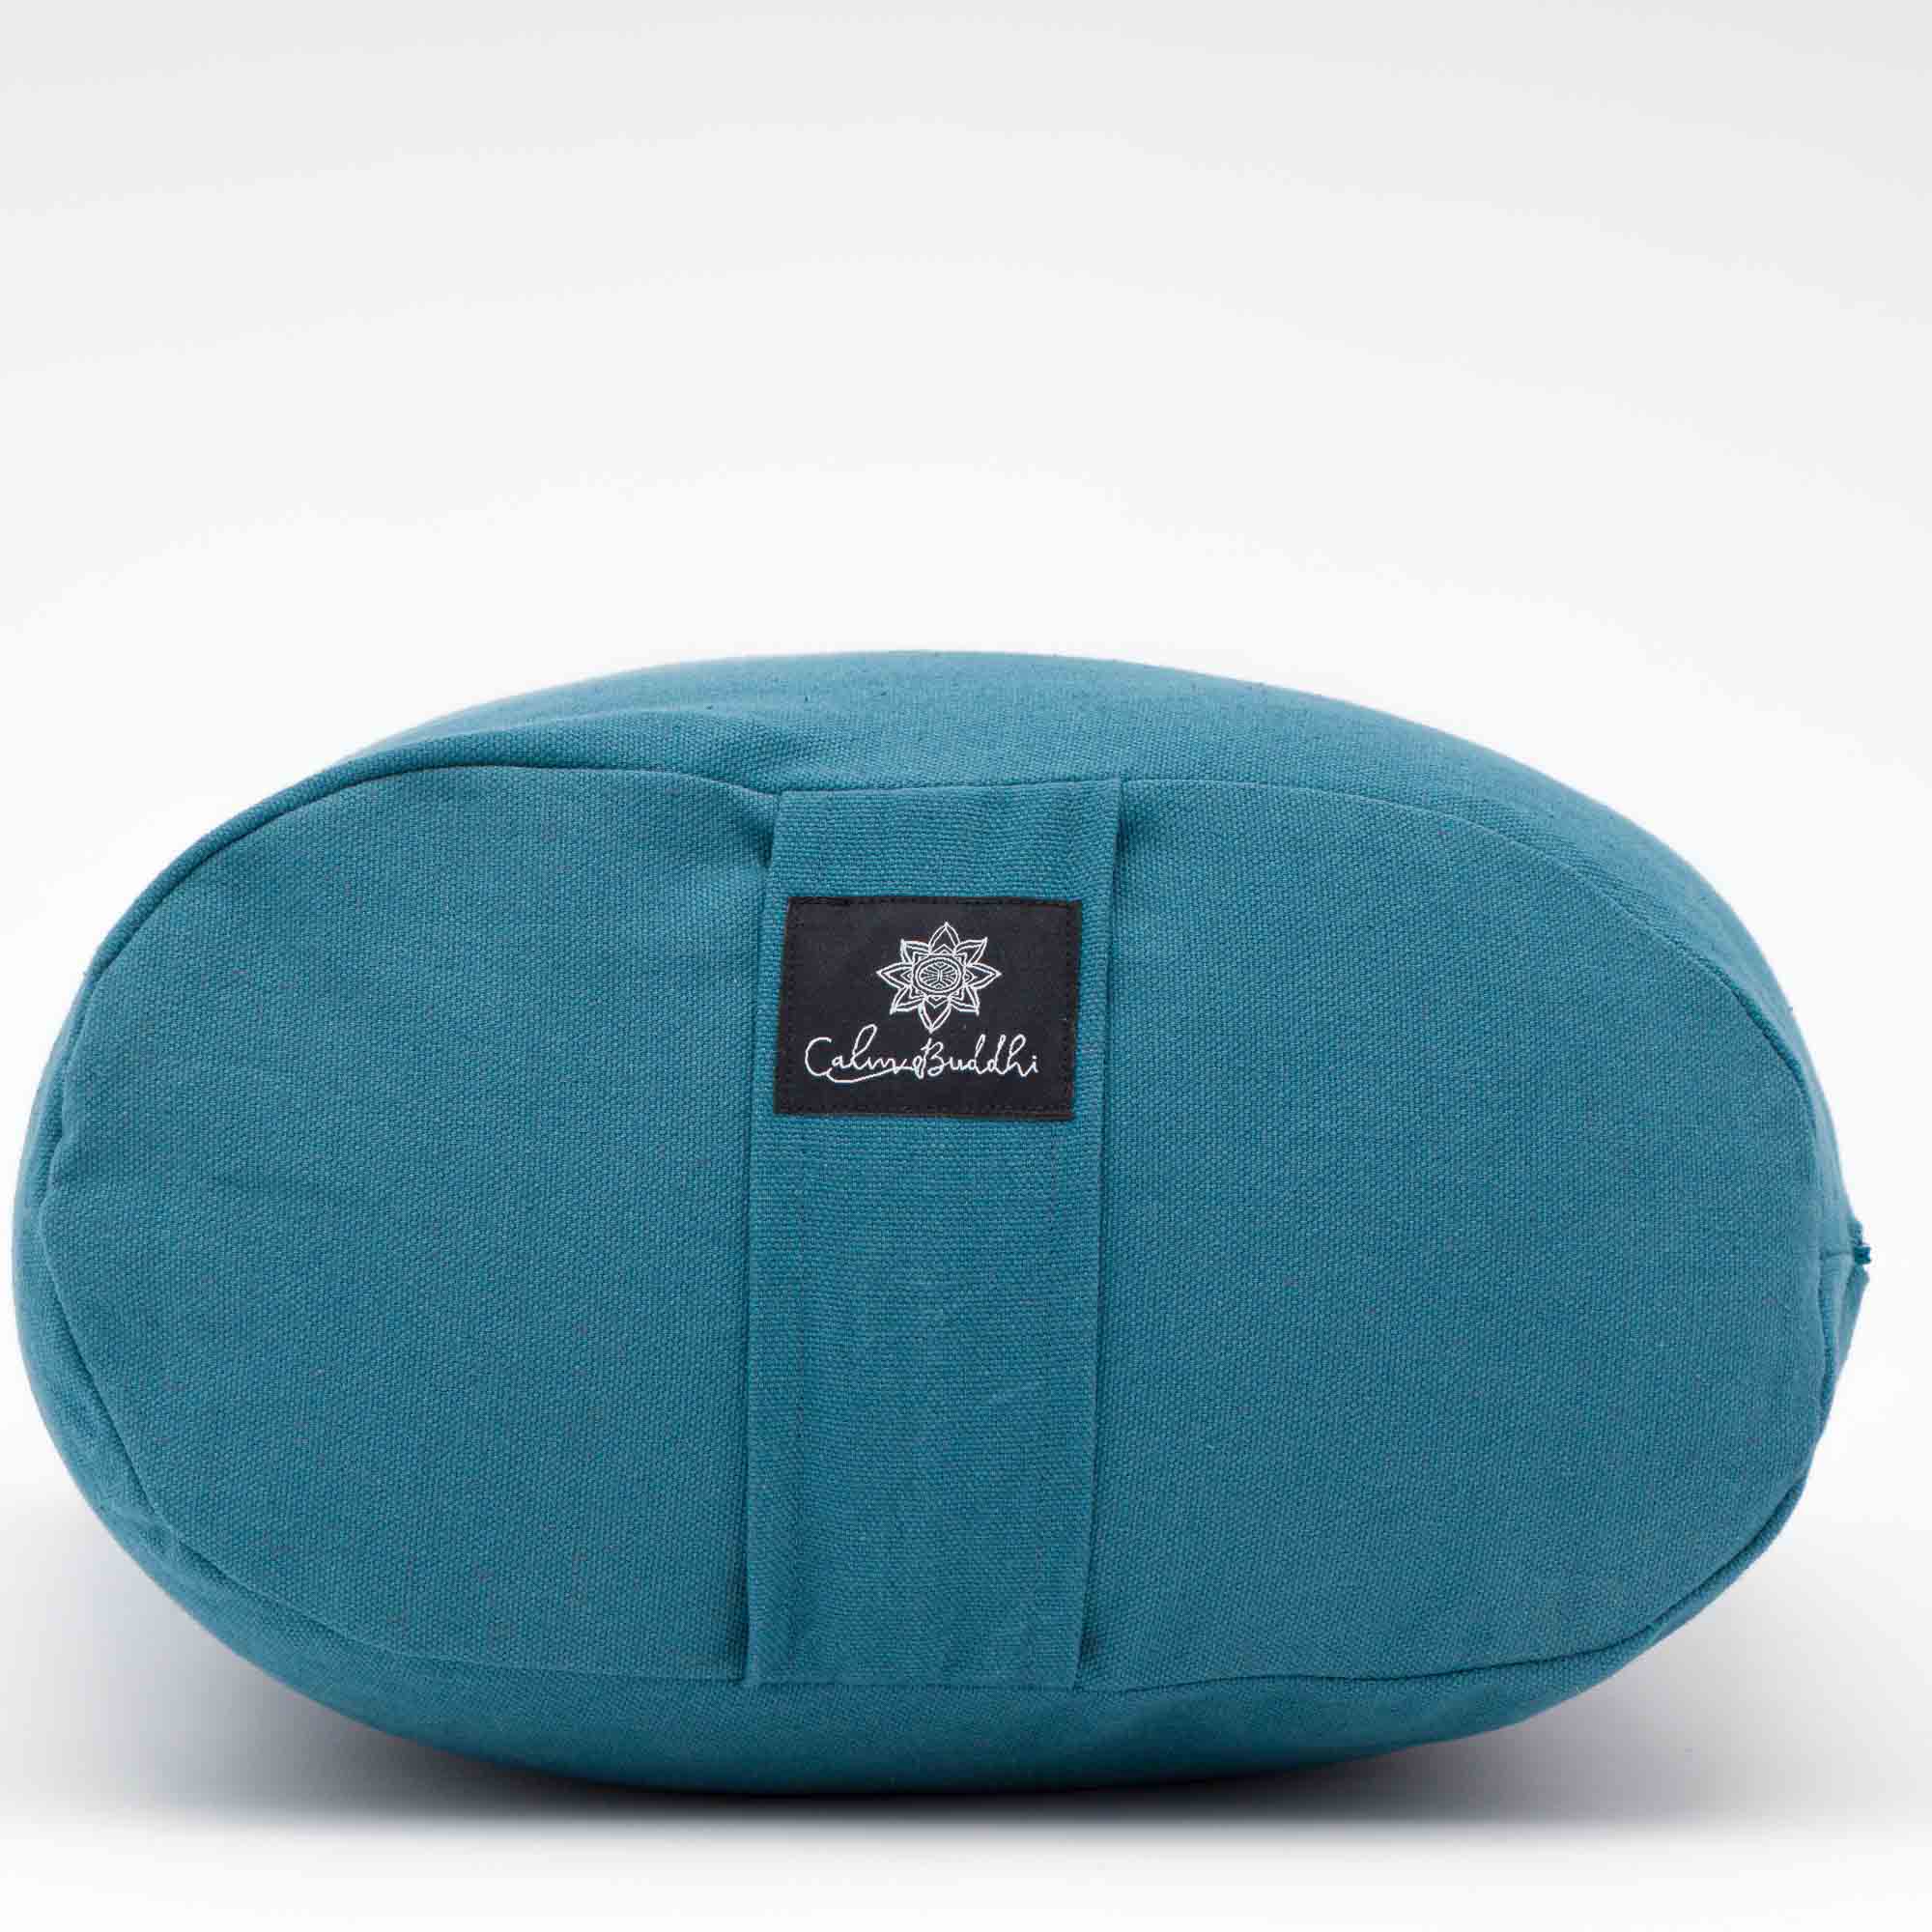 Purity - Oval Yoga Bolster COVER ONLY – Calm Buddhi